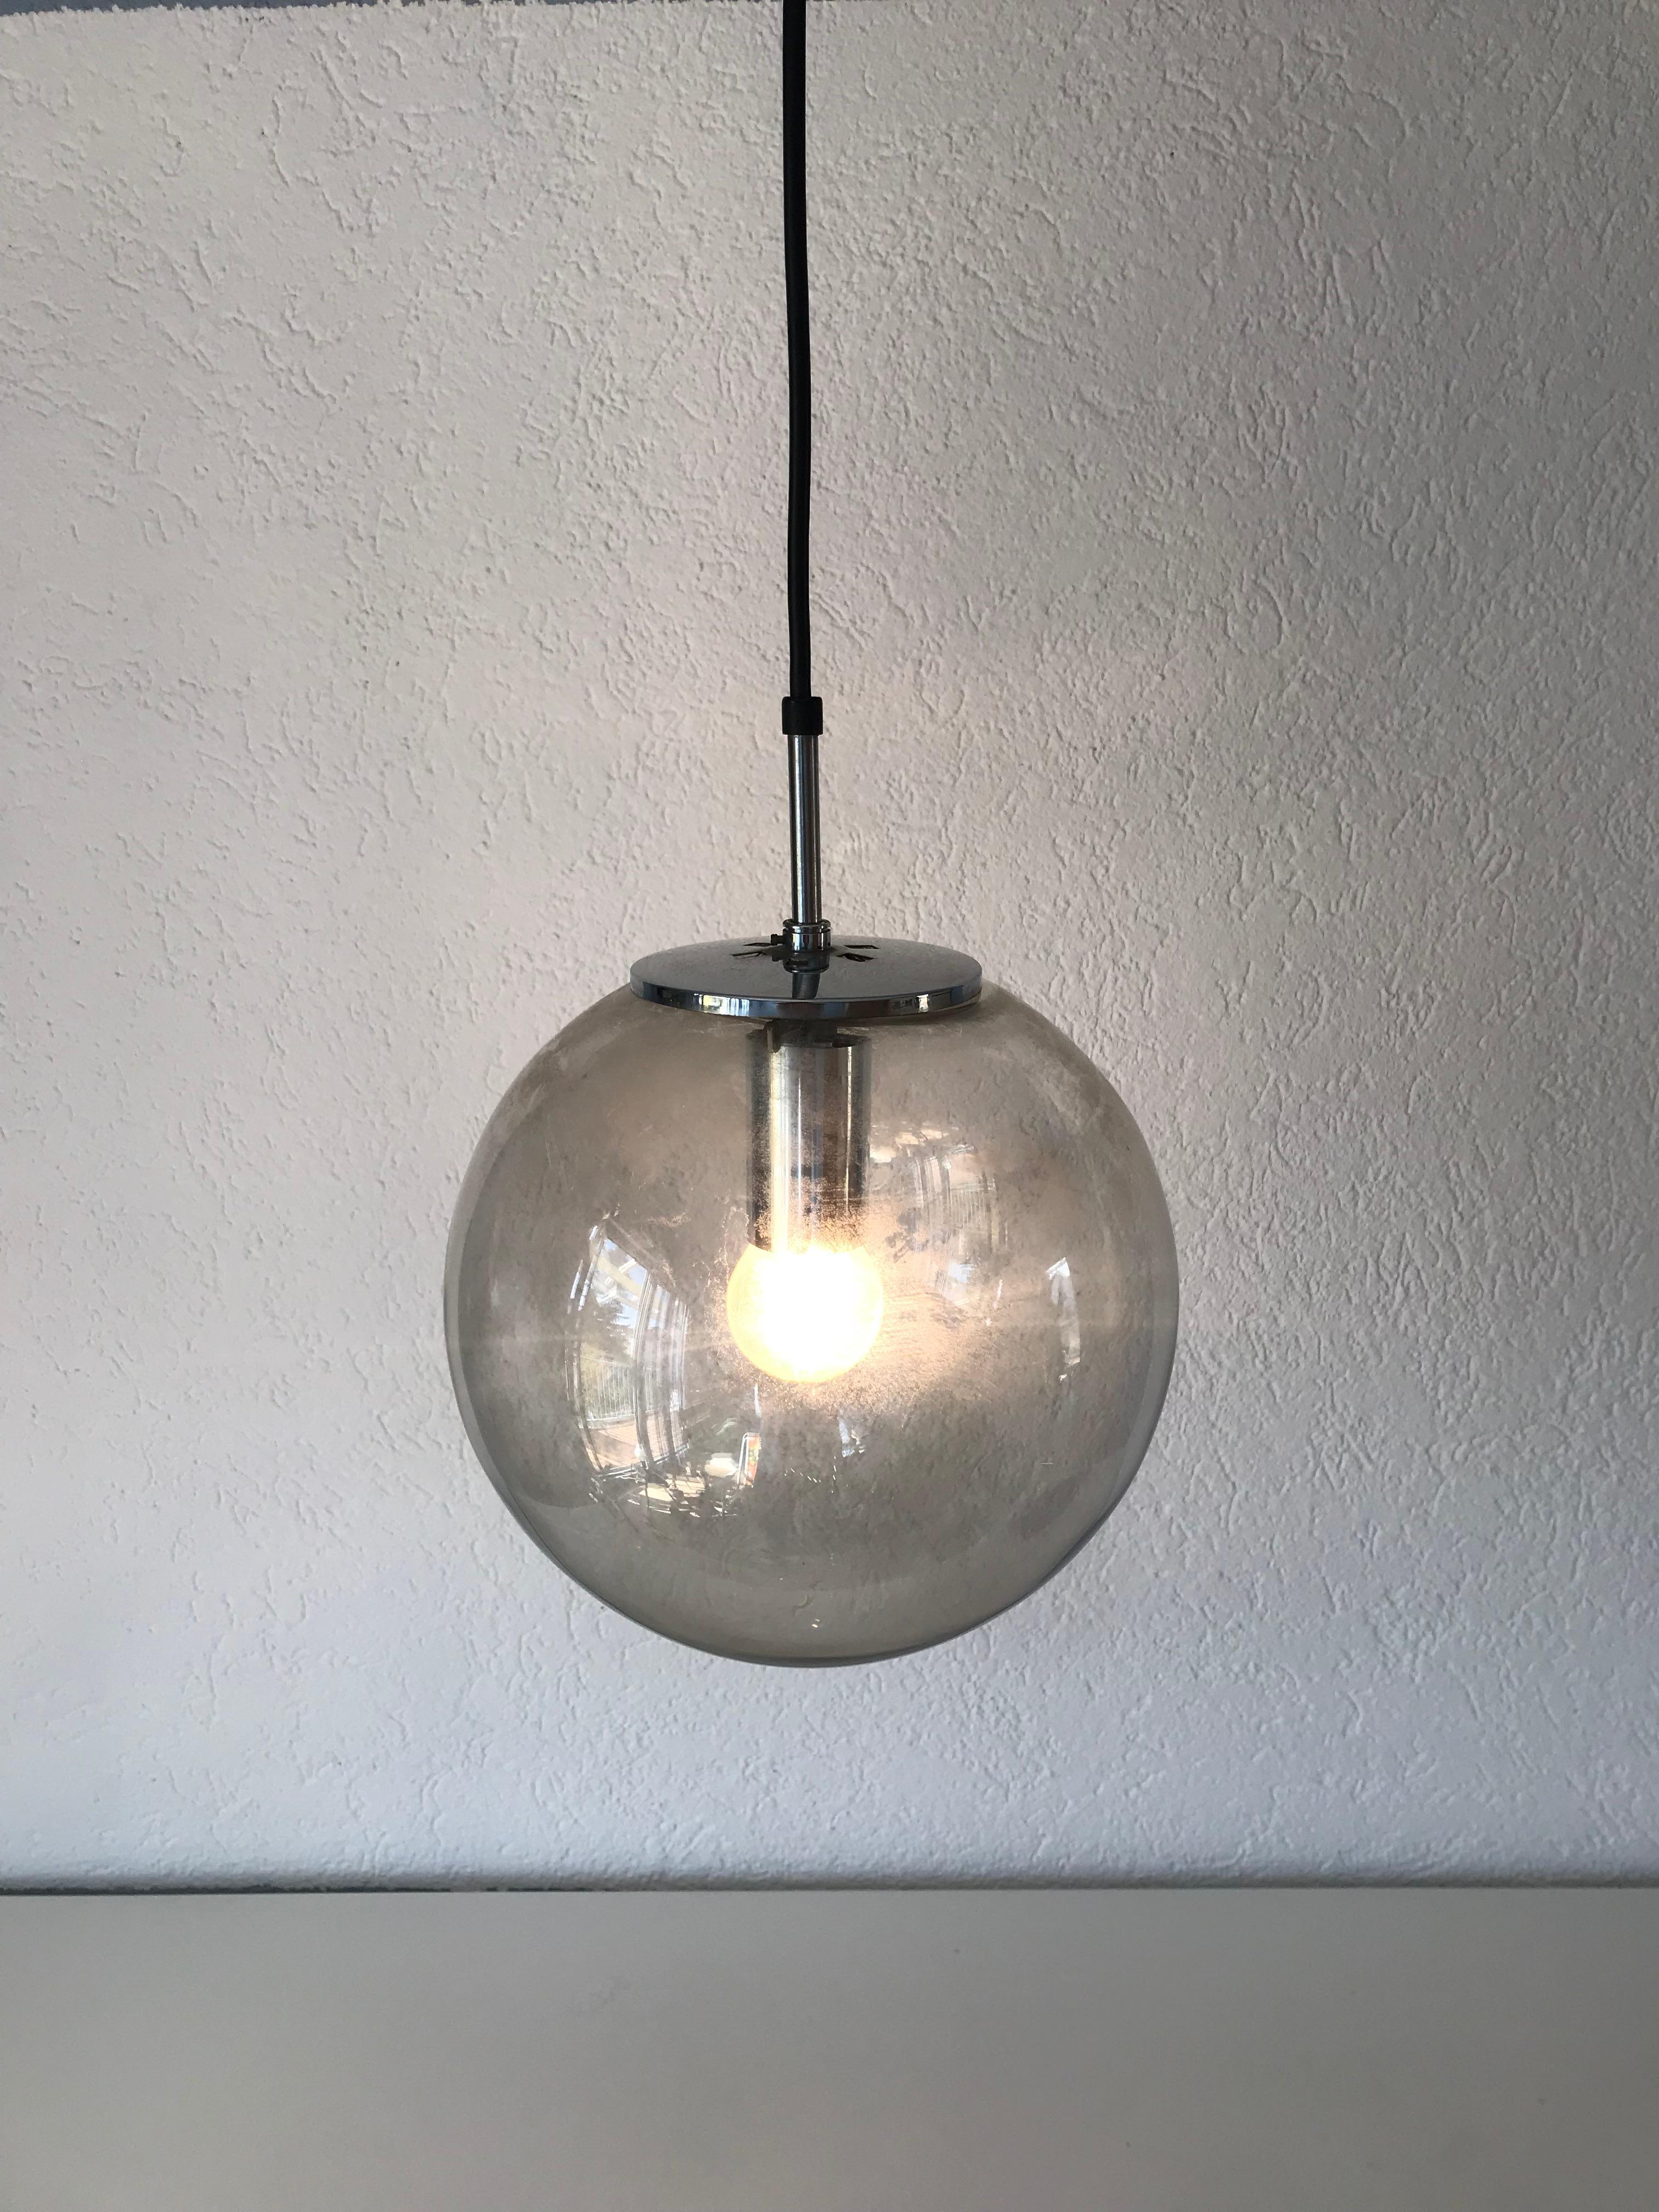 Large pendant lamp by Glashütte Limburg made in the 1970s in Germany. Full glass ball with chrome metal top. Good vintage condition. 

The light requires one E27 light bulb.